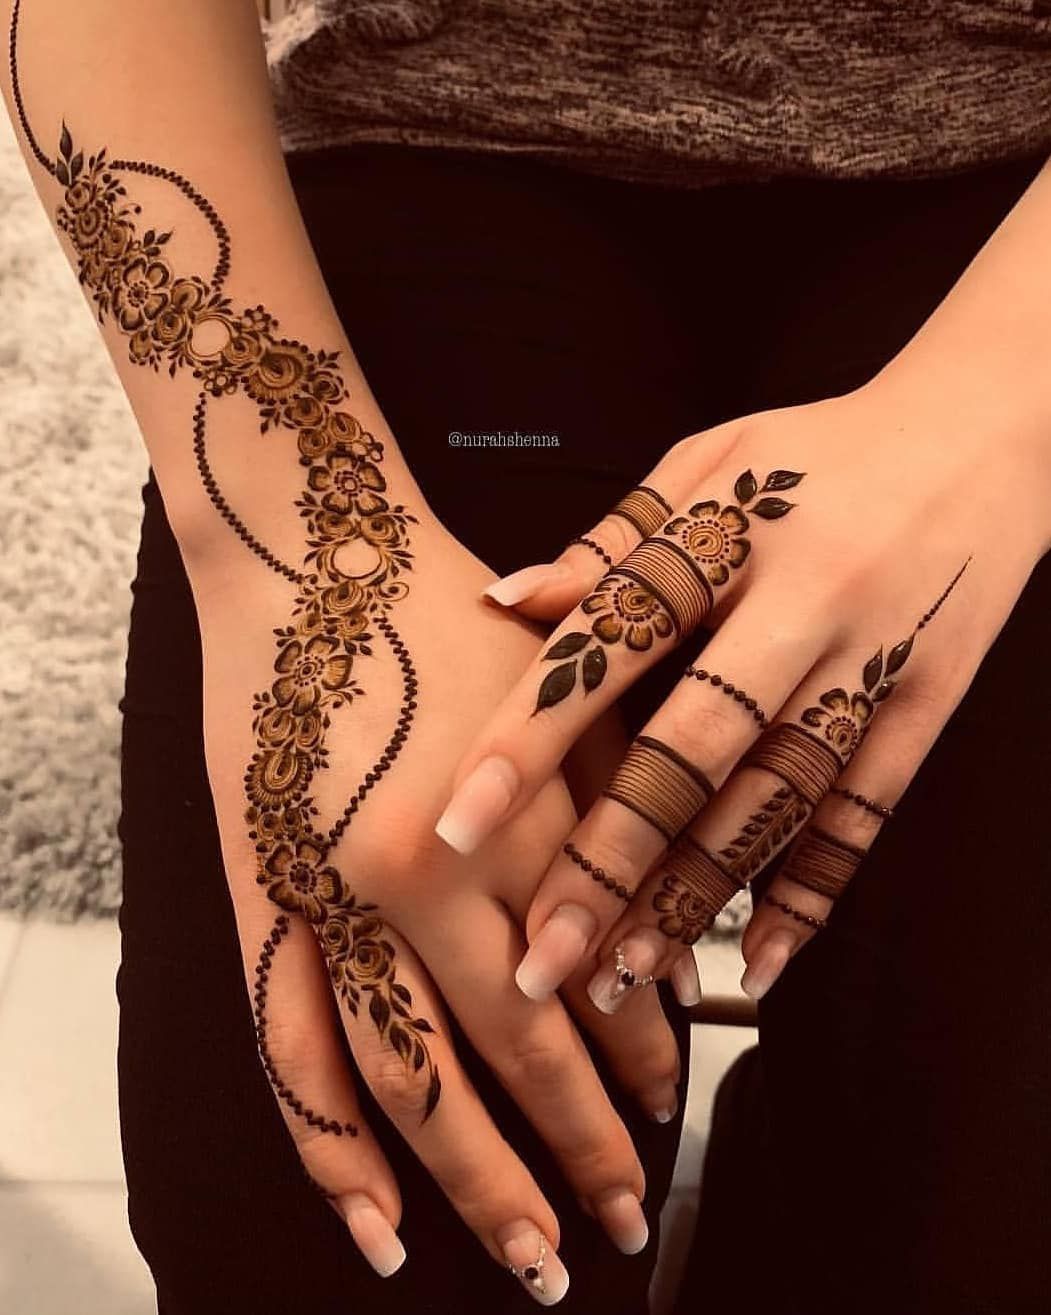 Dimple on Instagram: “Mehndi Designs.. Which one 1- 5? Follow @itx_dimple Follow @itx_dimple Follow @itx_dimple (for more videos and photos) Like 10 Posts &…”